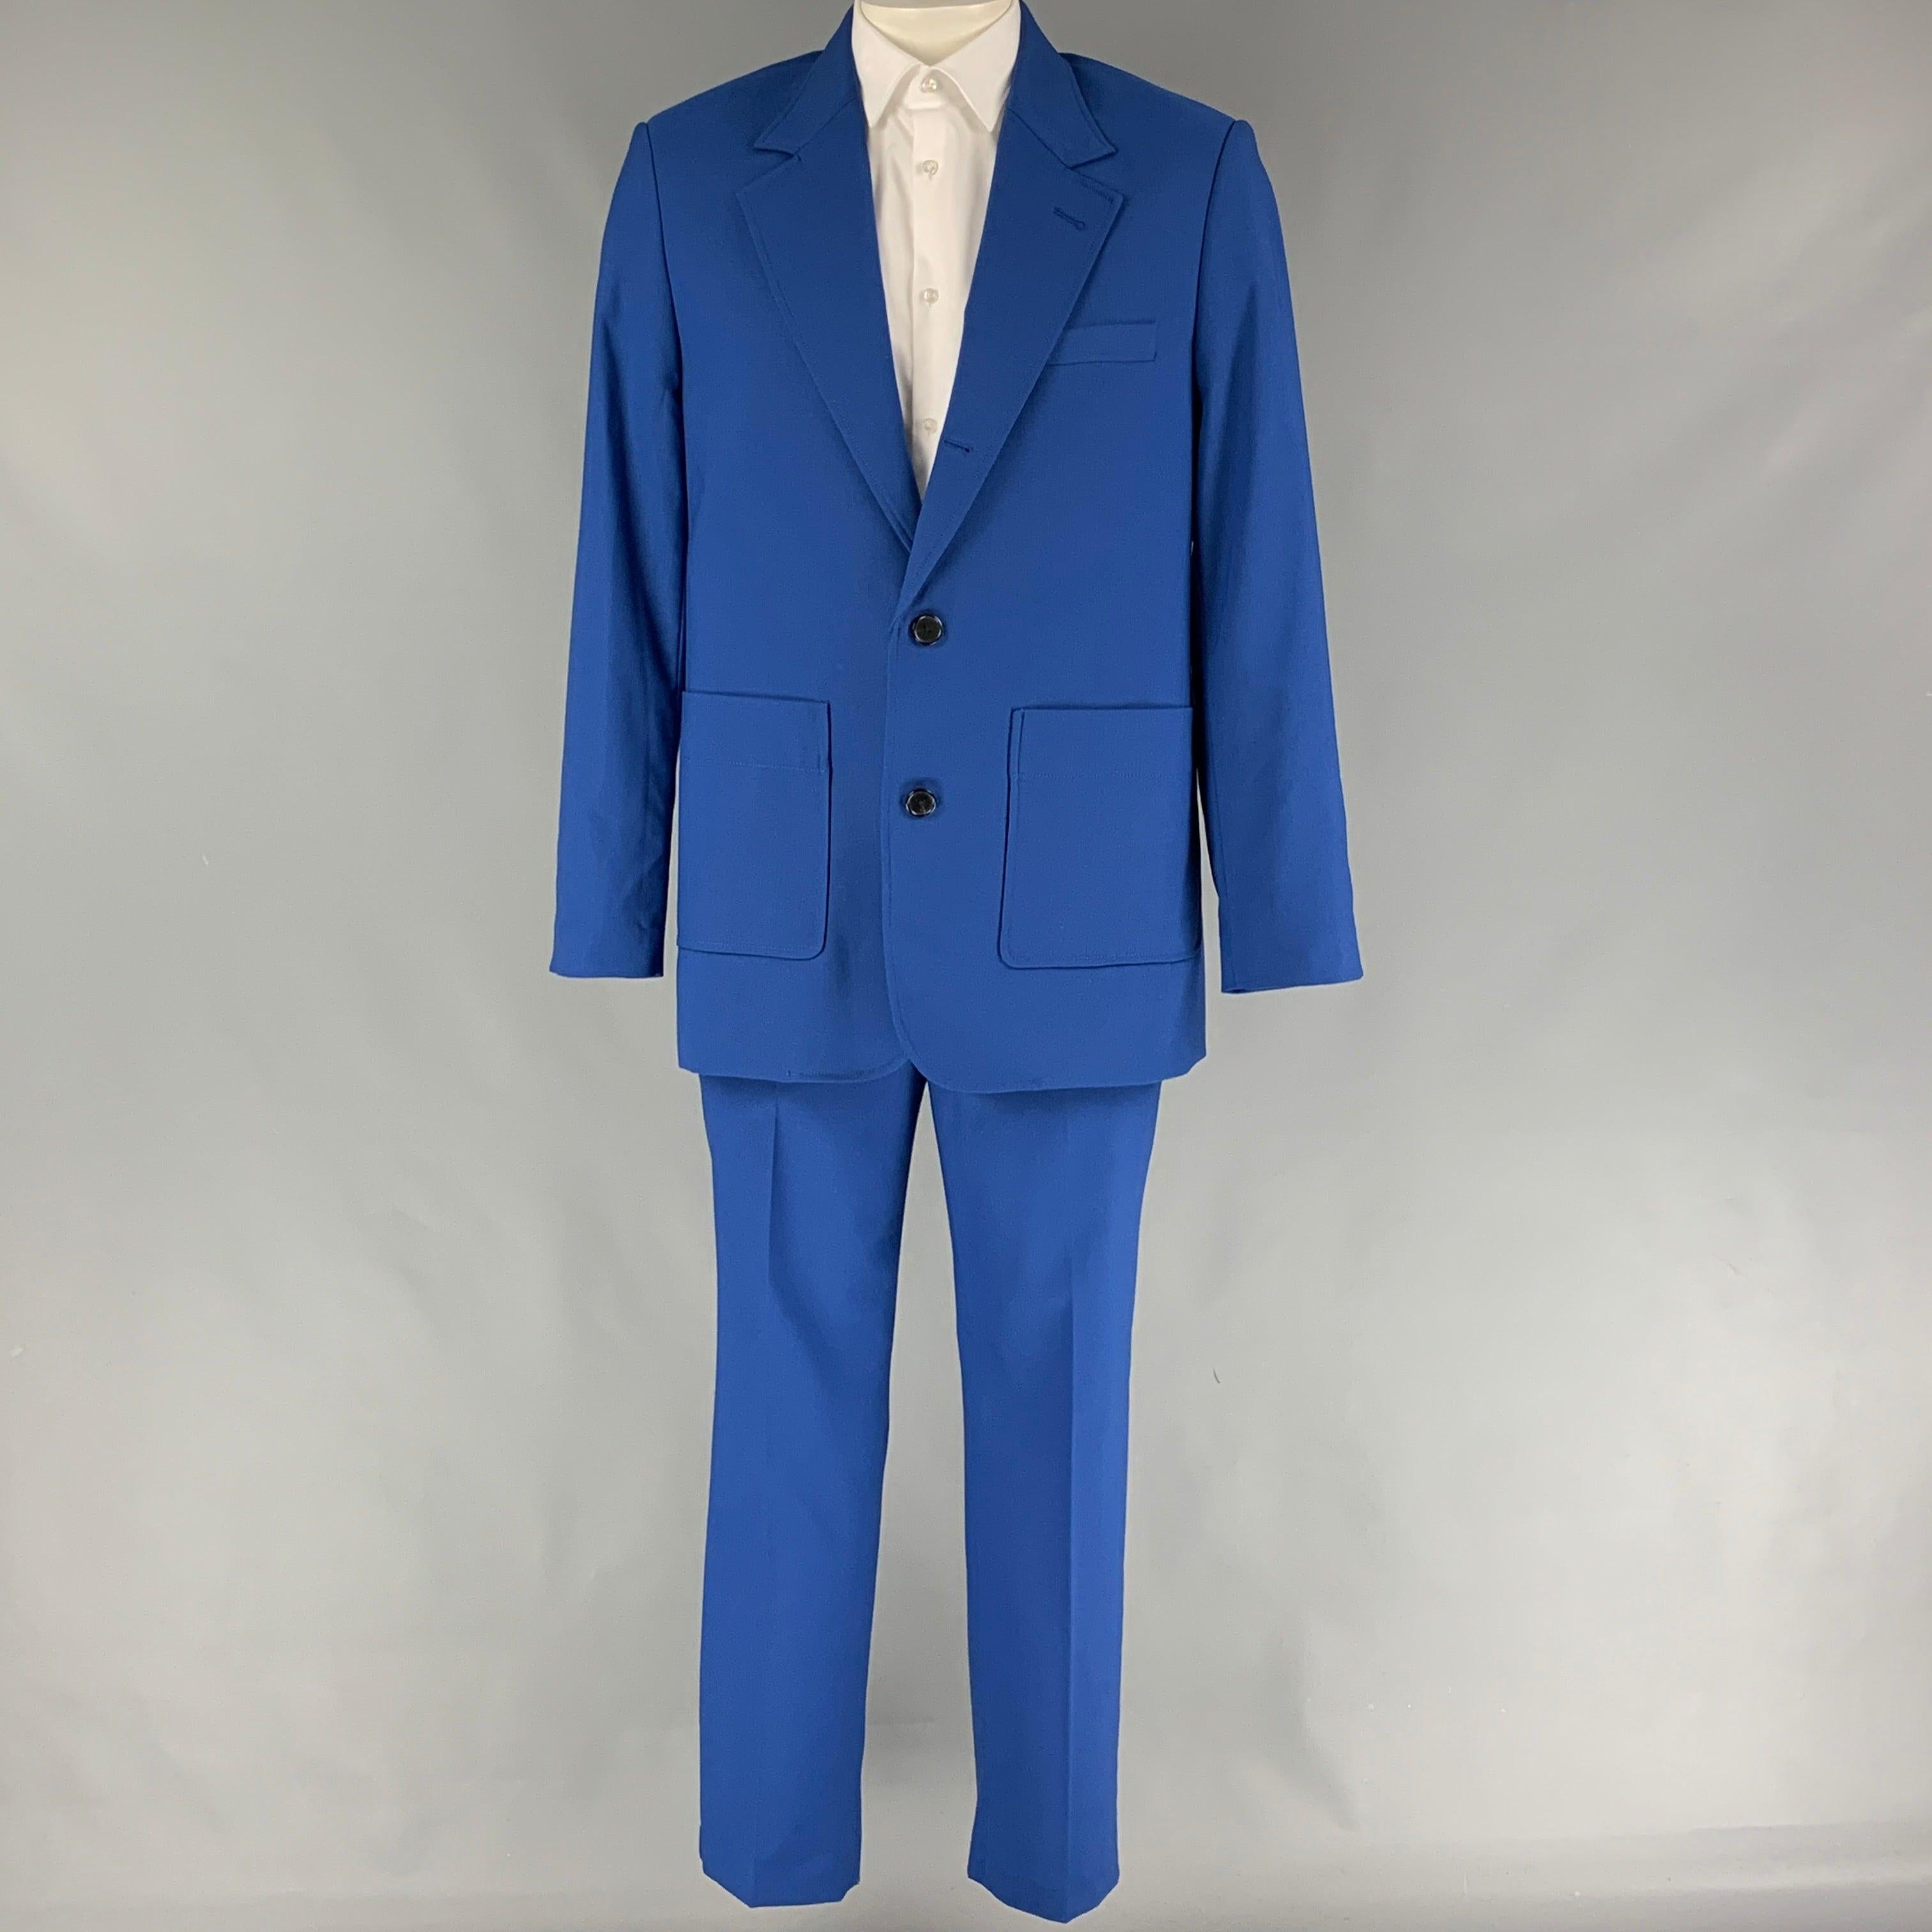 3.1 PHILLIP LIM
suit comes in a royal blue wool blend and includes a single breasted, three button sport coat with a notch lapel and matching flat front trousers. Comes with tags. Very Good Pre-Owned Condition.  

Marked:   40 

Measurements: 
 